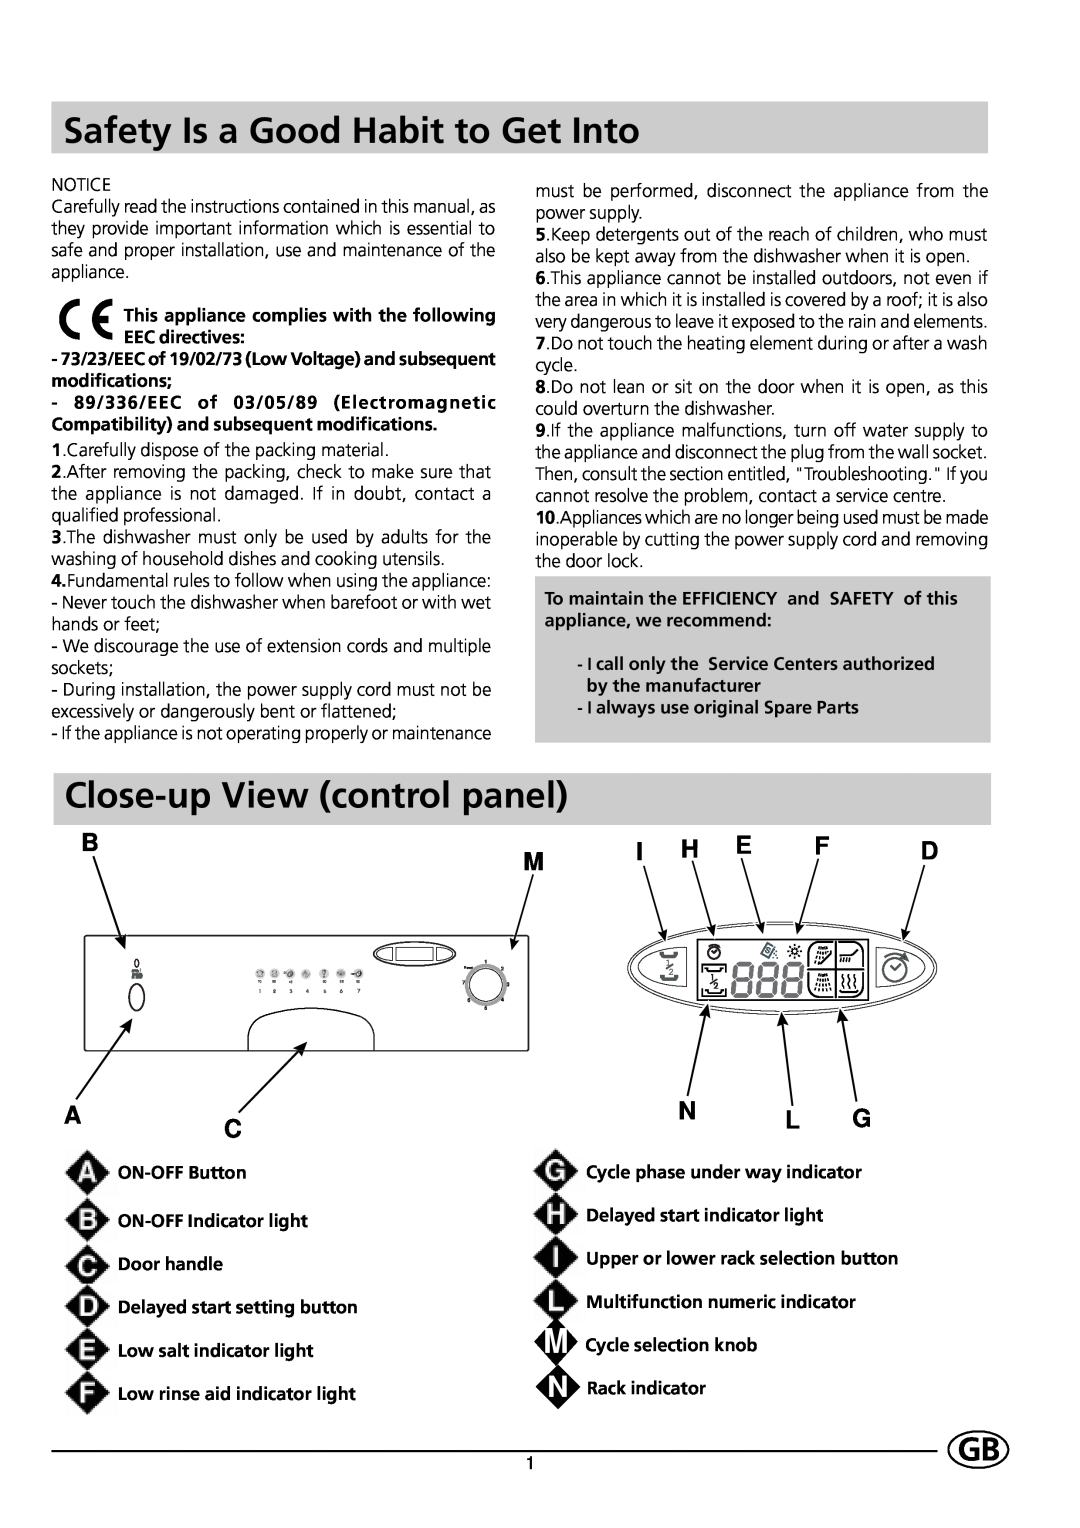 Indesit DE 43 manual Safety Is a Good Habit to Get Into, Close-up View control panel, Bm I H E F D, Acn L G 